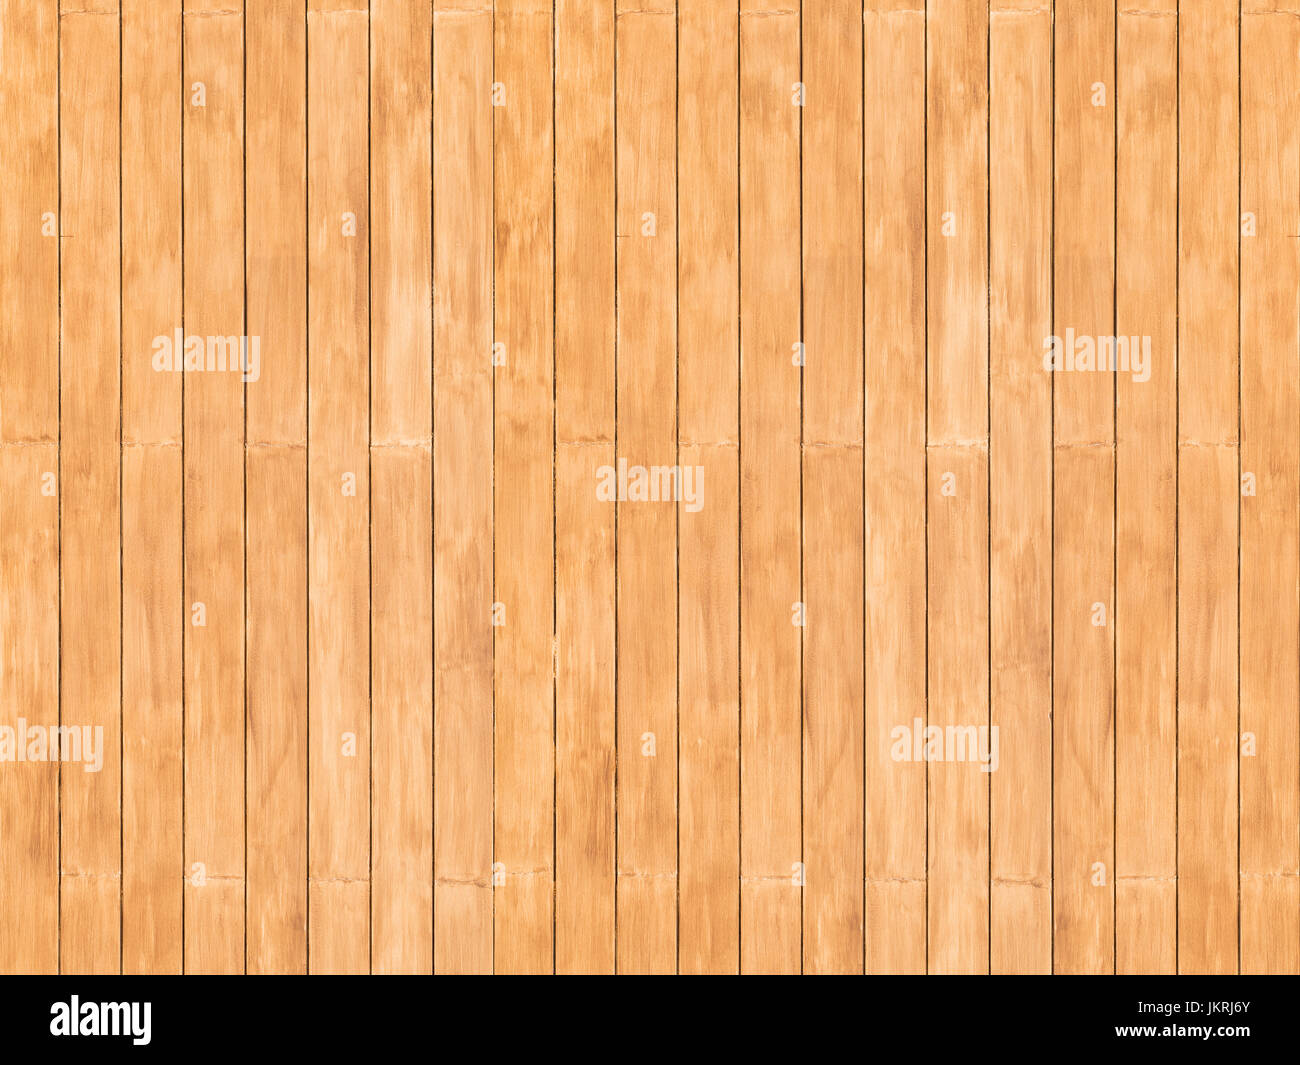 timber wood background or wooden background Stock Photo